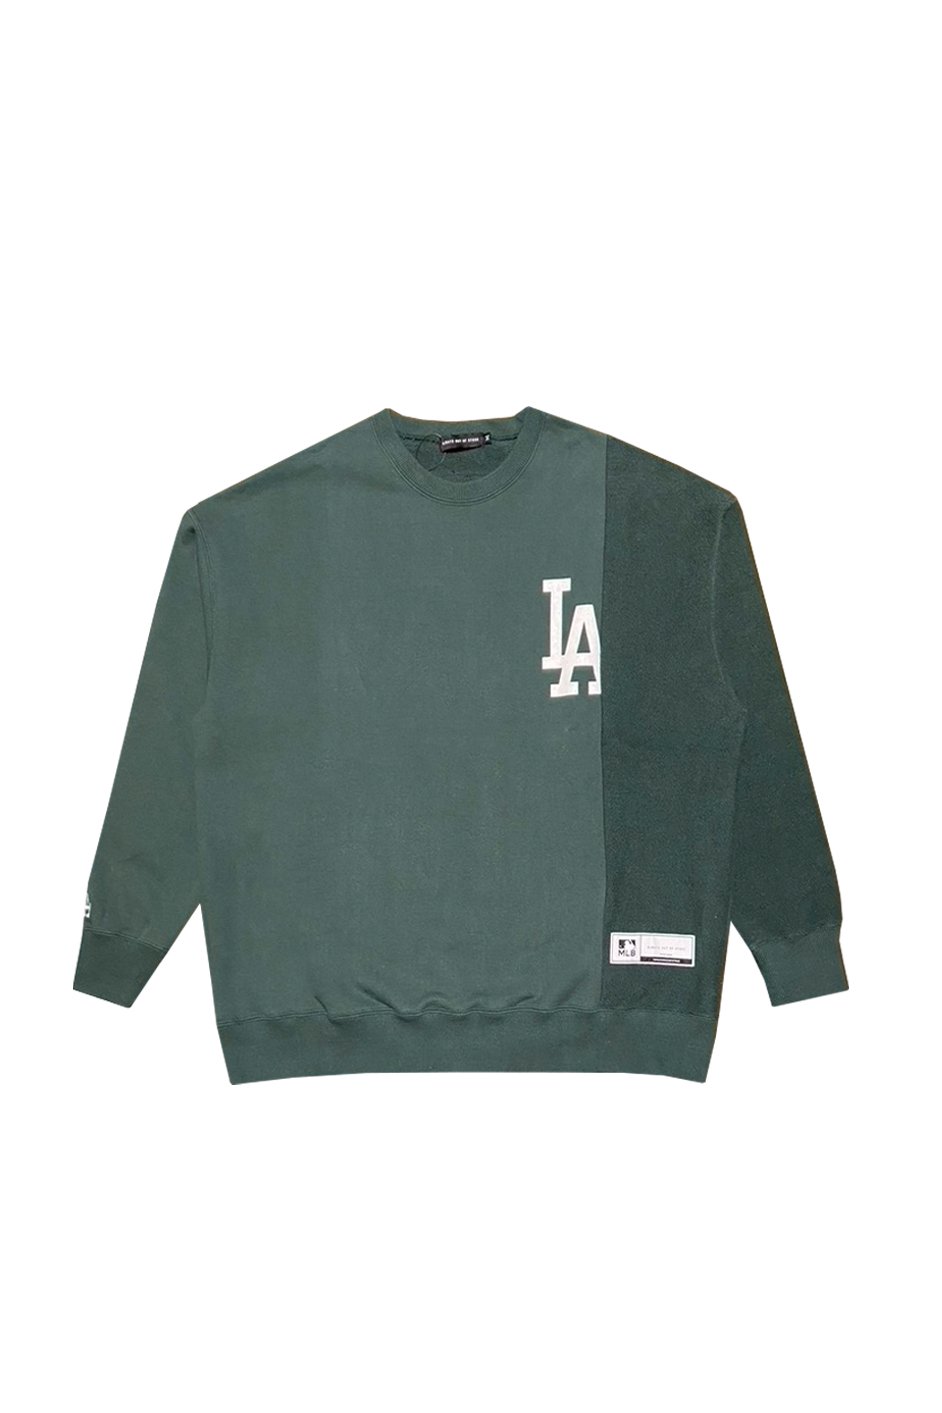 MLB SWITCHED CREW NECK 【DODGERS】